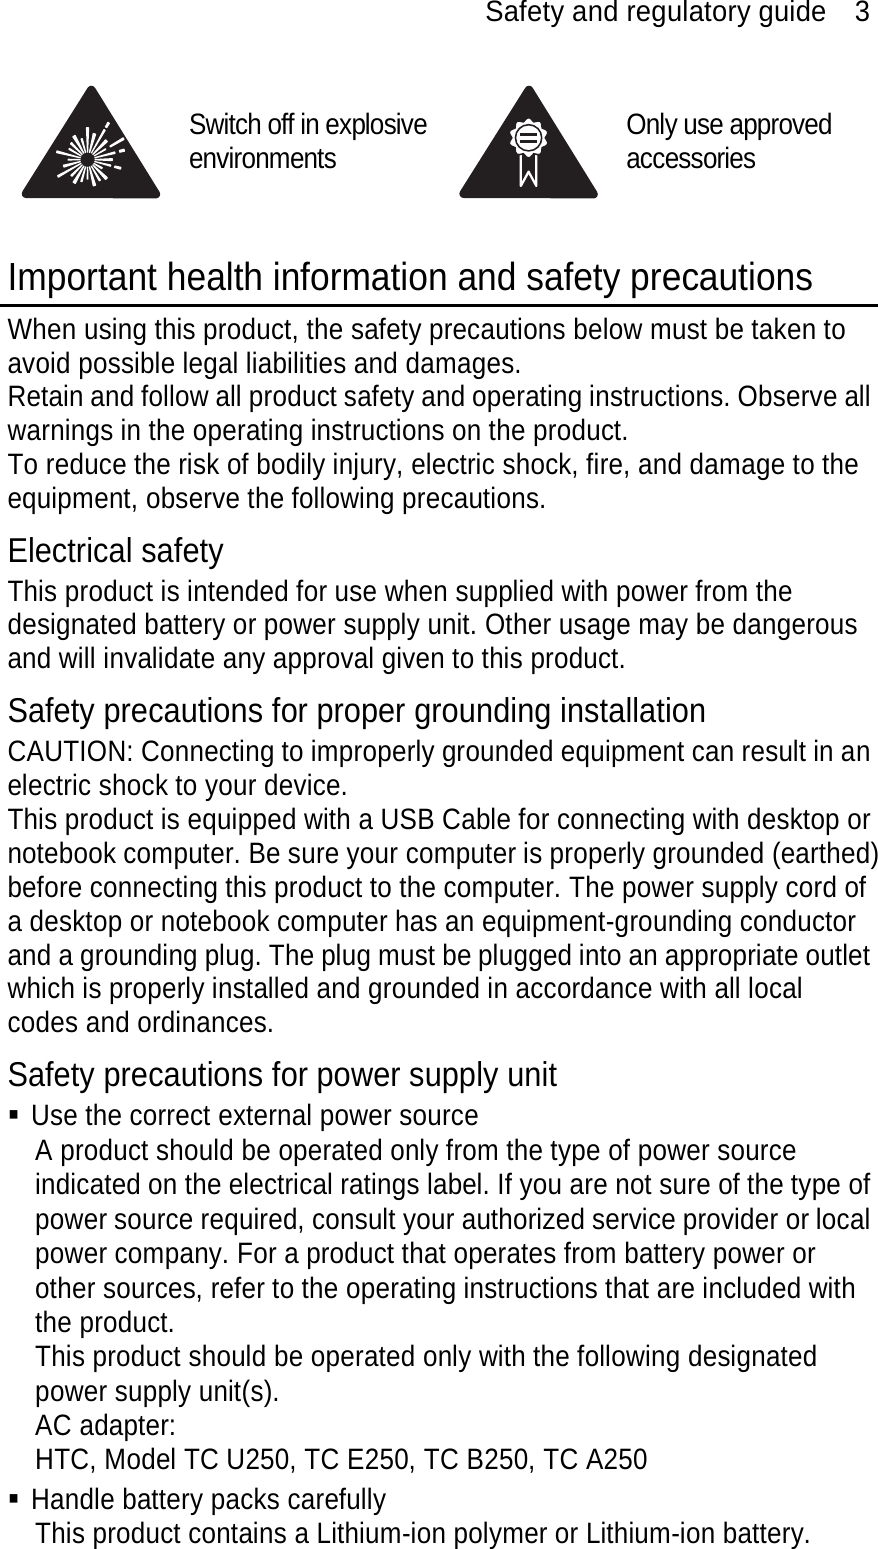 Safety and regulatory guide    3  Switch off in explosive environments Only use approved accessories  Important health information and safety precautions When using this product, the safety precautions below must be taken to avoid possible legal liabilities and damages. Retain and follow all product safety and operating instructions. Observe all warnings in the operating instructions on the product. To reduce the risk of bodily injury, electric shock, fire, and damage to the equipment, observe the following precautions. Electrical safety This product is intended for use when supplied with power from the designated battery or power supply unit. Other usage may be dangerous and will invalidate any approval given to this product. Safety precautions for proper grounding installation CAUTION: Connecting to improperly grounded equipment can result in an electric shock to your device. This product is equipped with a USB Cable for connecting with desktop or notebook computer. Be sure your computer is properly grounded (earthed) before connecting this product to the computer. The power supply cord of a desktop or notebook computer has an equipment-grounding conductor and a grounding plug. The plug must be plugged into an appropriate outlet which is properly installed and grounded in accordance with all local codes and ordinances. Safety precautions for power supply unit  Use the correct external power source A product should be operated only from the type of power source indicated on the electrical ratings label. If you are not sure of the type of power source required, consult your authorized service provider or local power company. For a product that operates from battery power or other sources, refer to the operating instructions that are included with the product. This product should be operated only with the following designated power supply unit(s). AC adapter: HTC, Model TC U250, TC E250, TC B250, TC A250  Handle battery packs carefully This product contains a Lithium-ion polymer or Lithium-ion battery. 